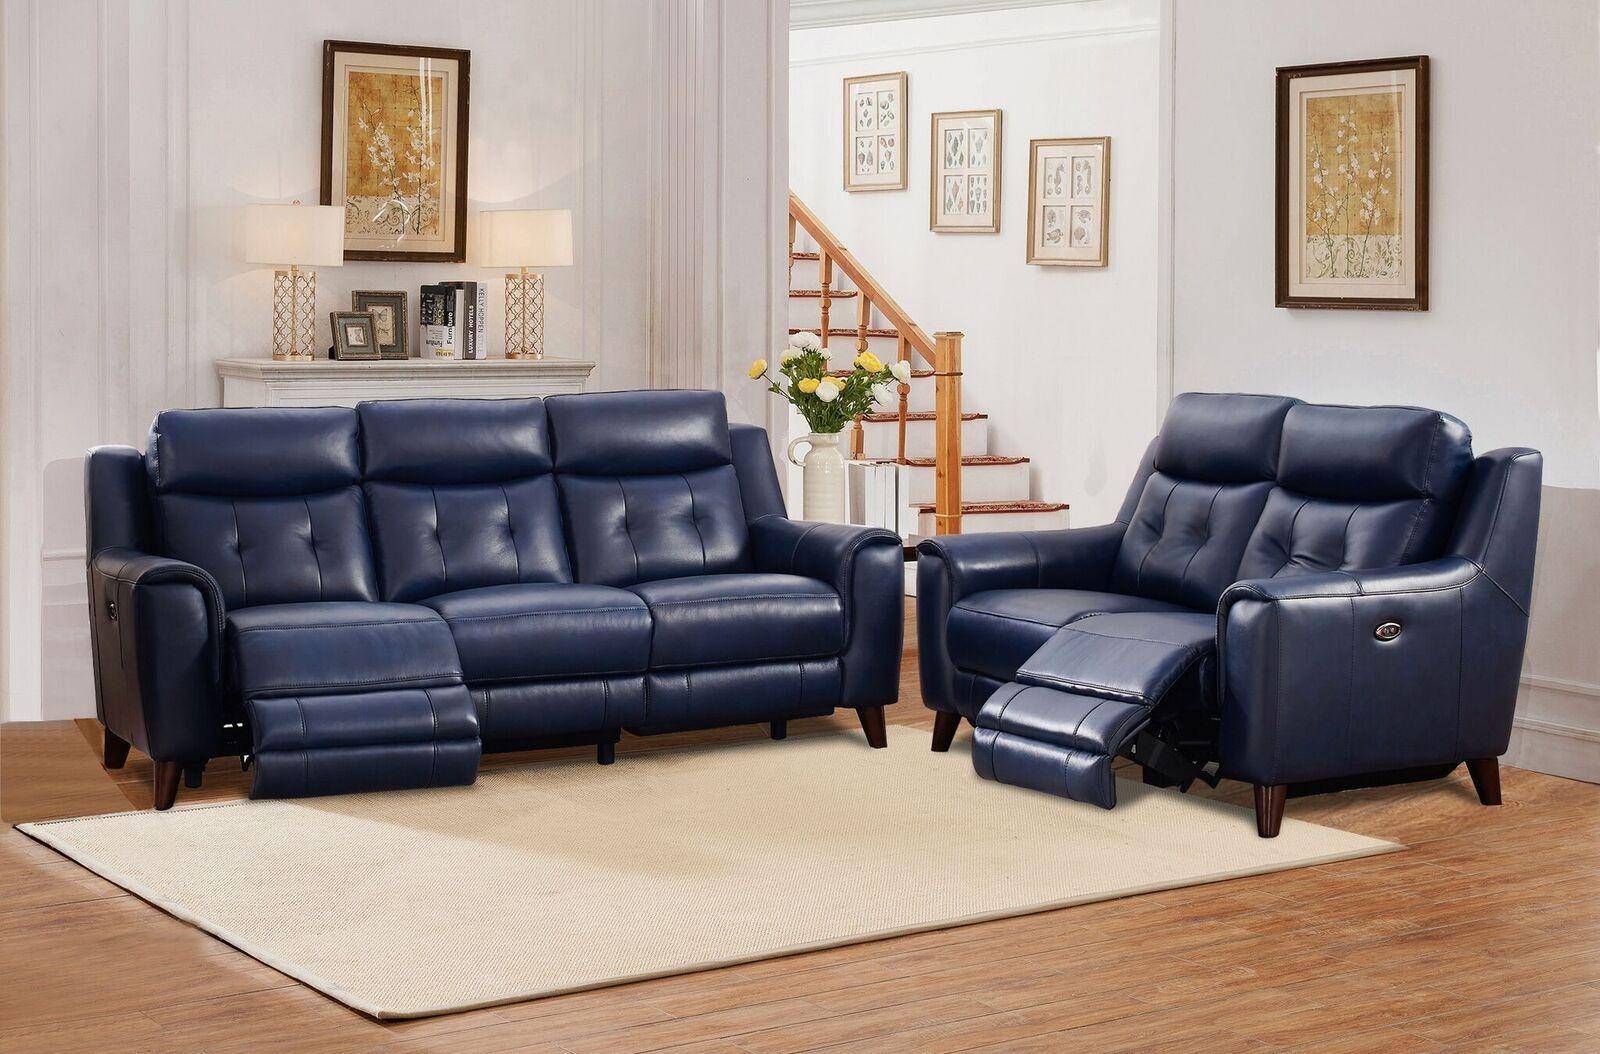 Buy Amax Hydeline Hastings Reclining Sofa Set 3 Pcs In Intended For Bloutop Upholstered Sectional Sofas (View 14 of 15)